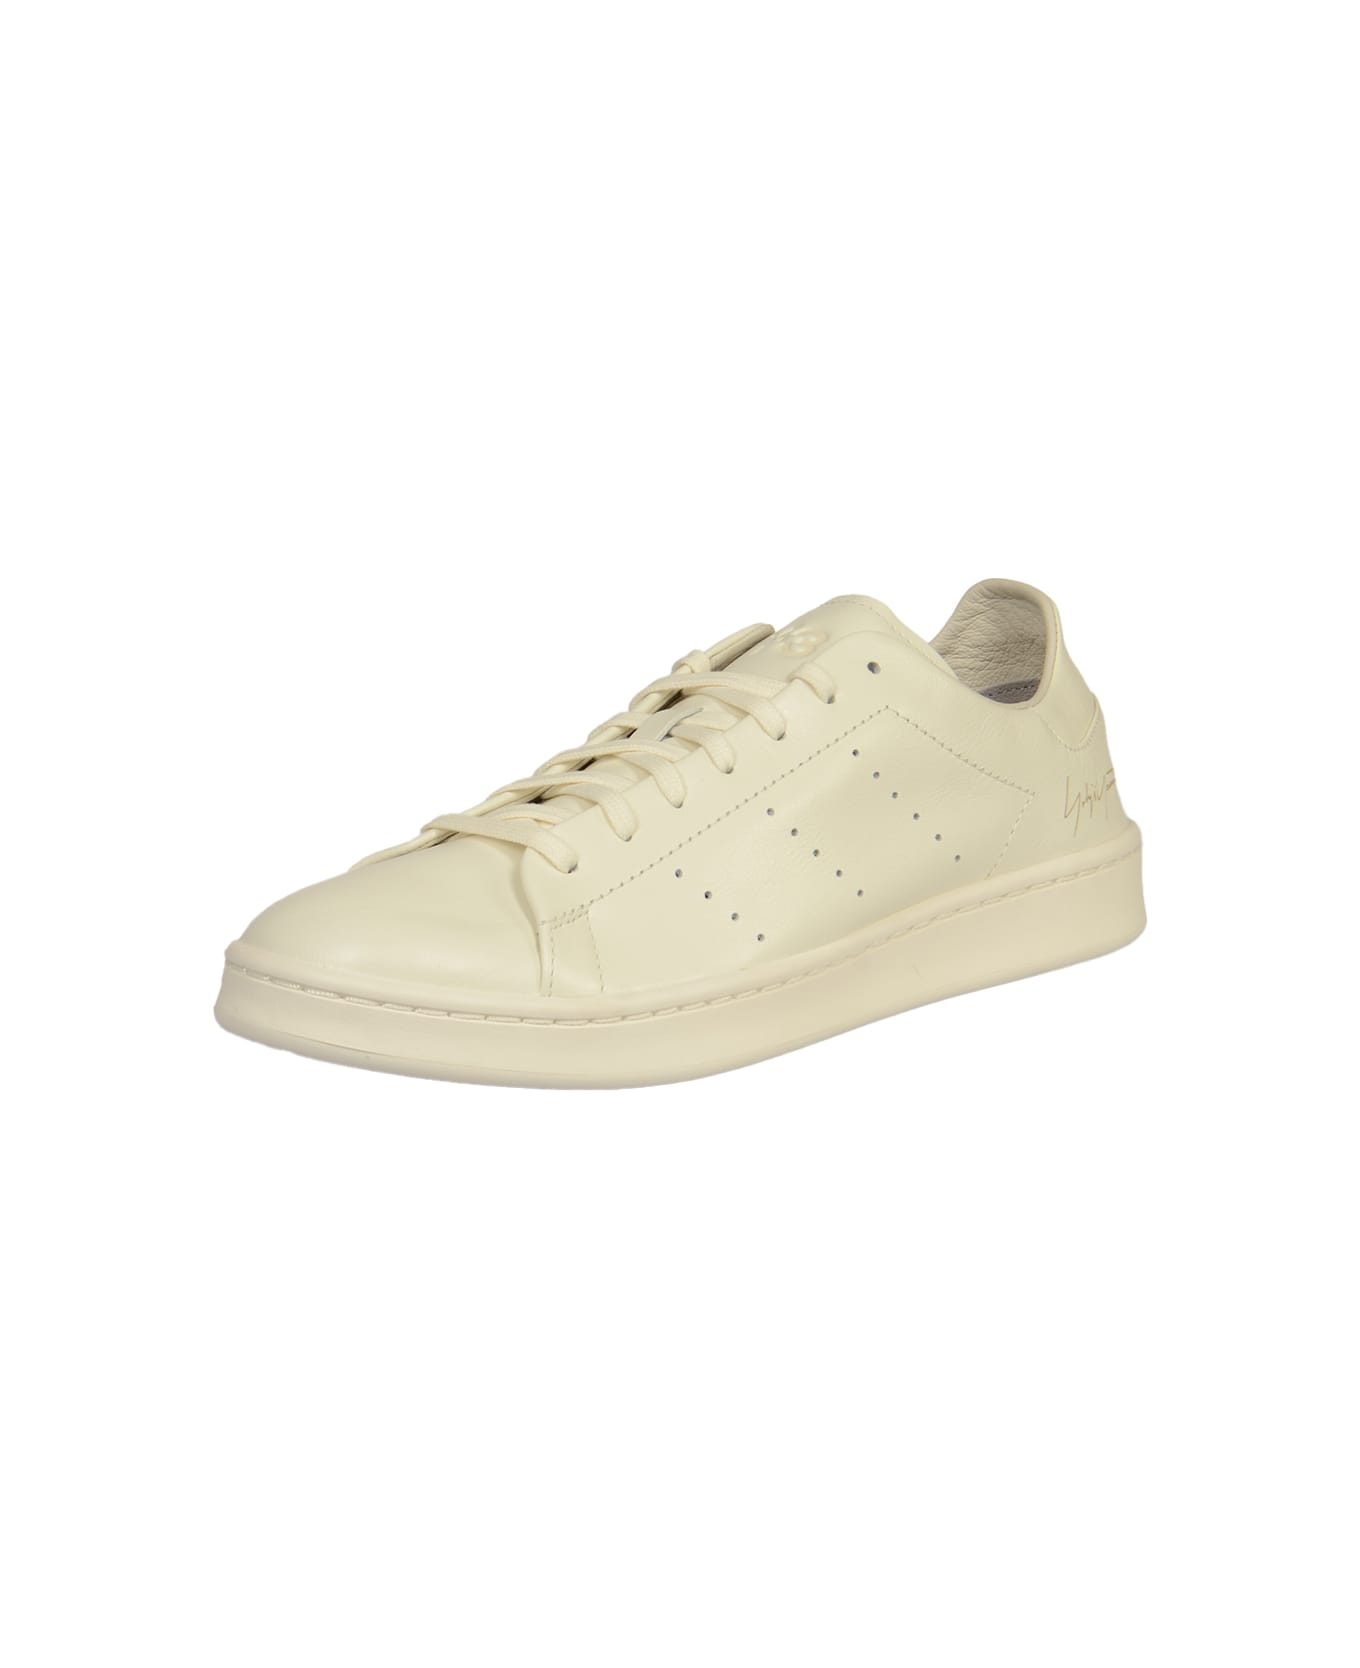 Y-3 Stan Smith Sneakers - Off White